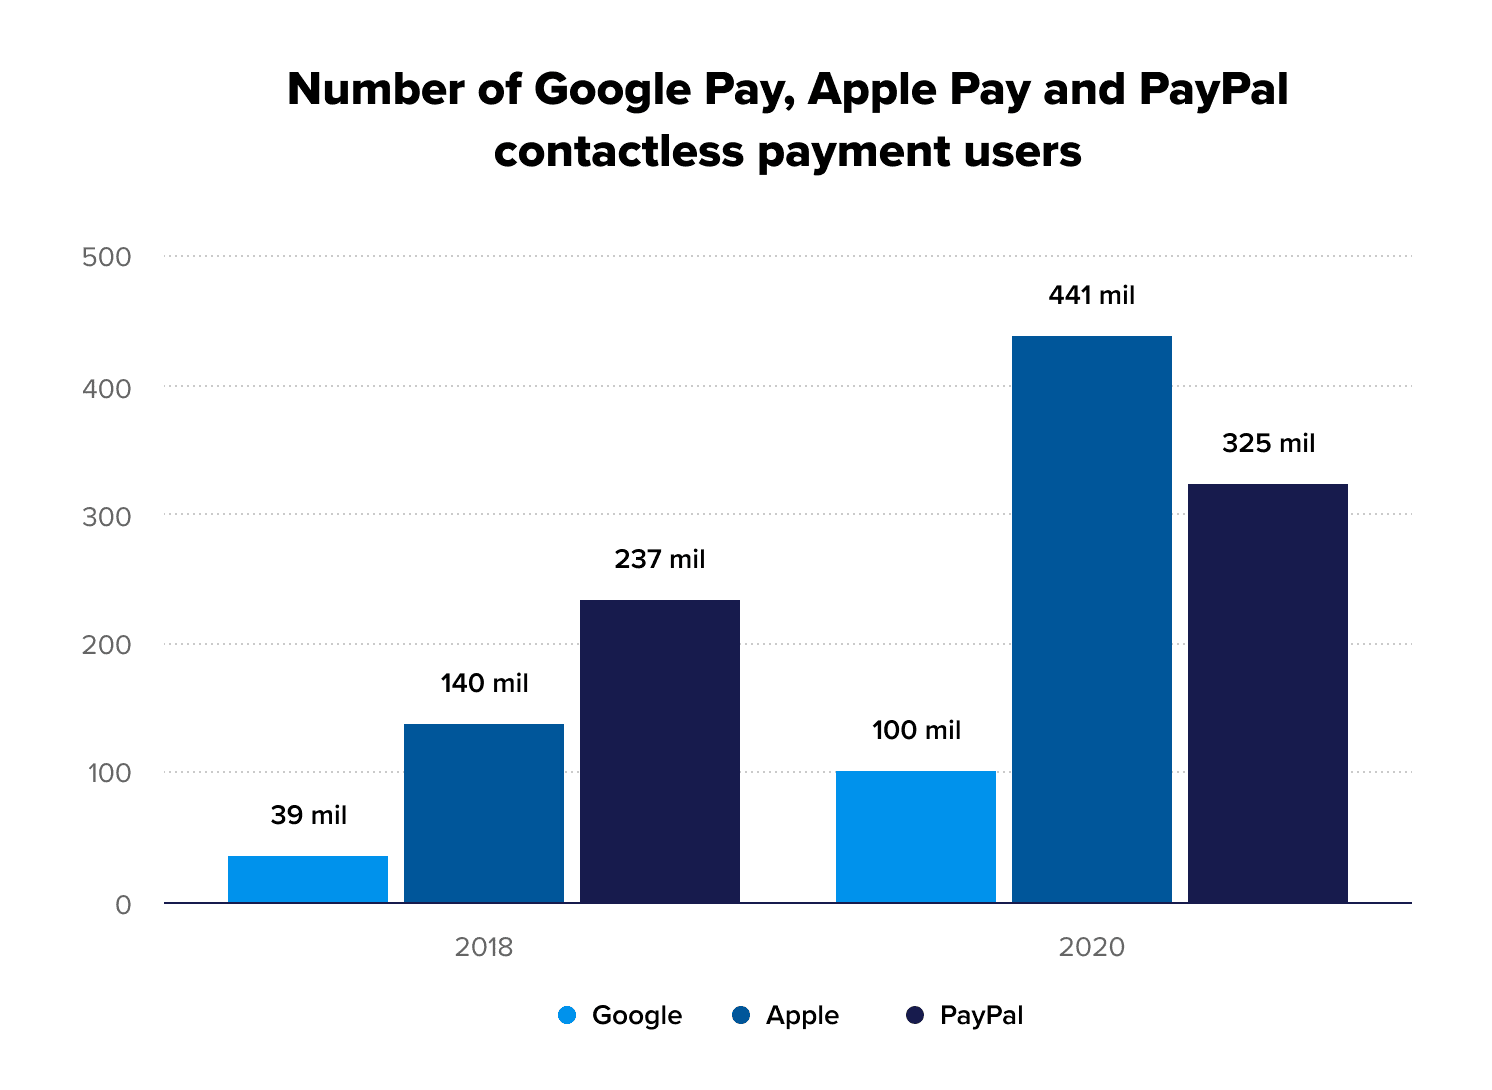 Nurber of Google Pay, Apple Pay, and PayPal users